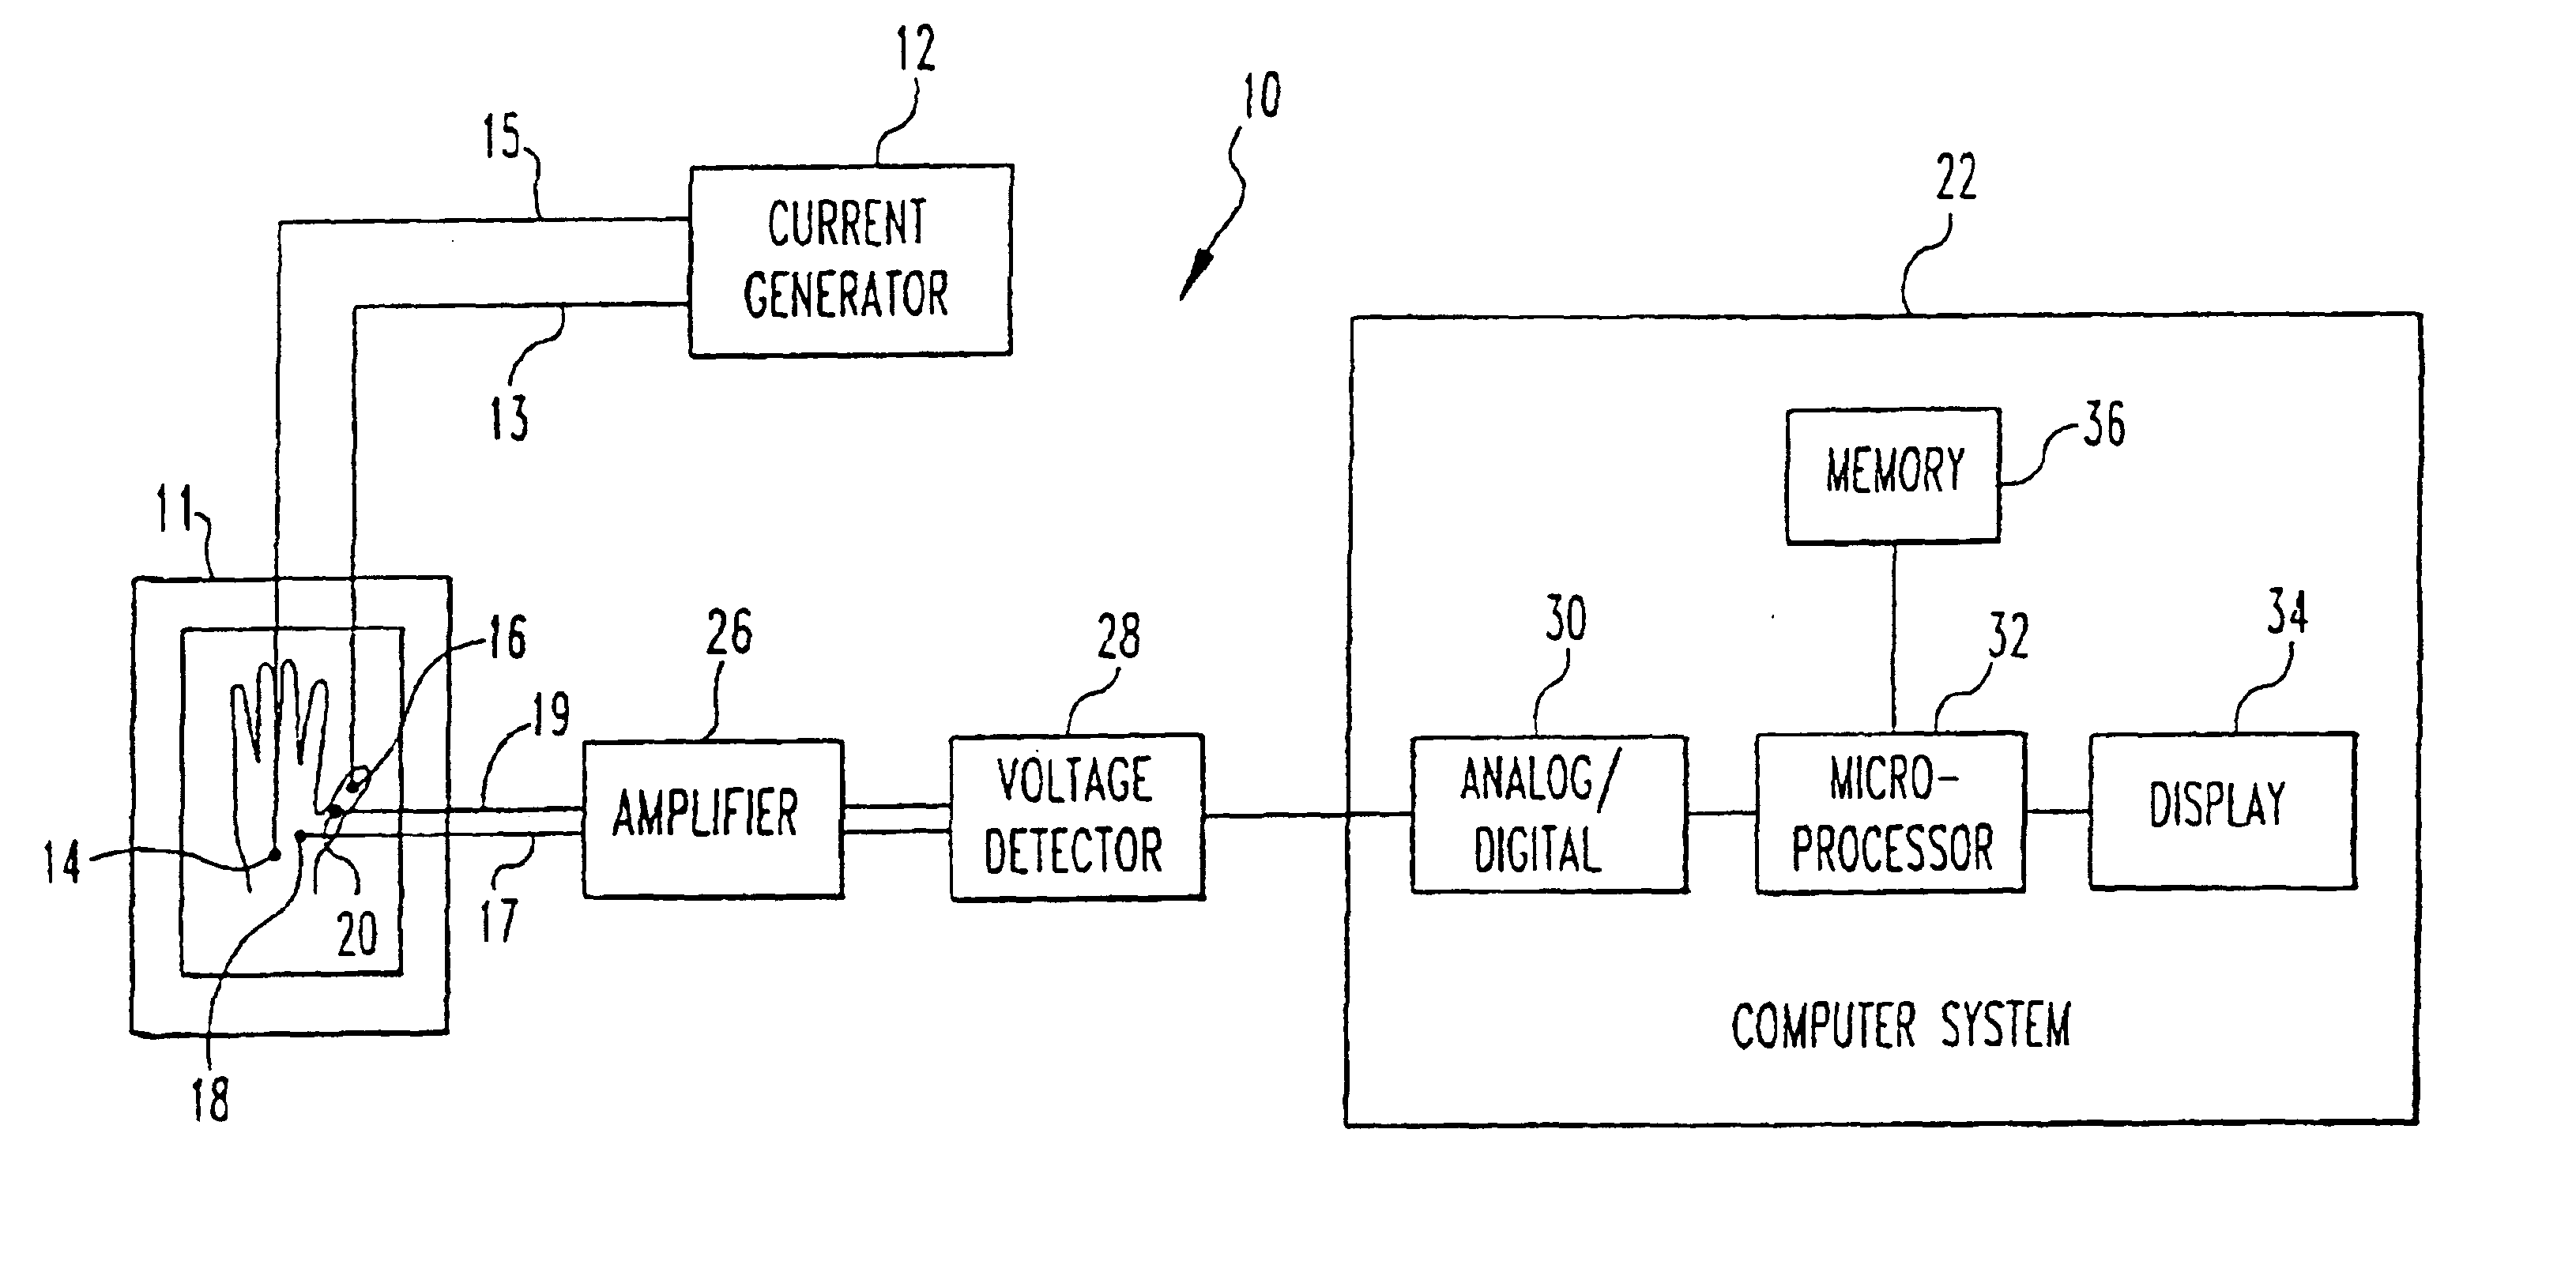 Method and system for biometric recognition based on electric and/or magnetic characteristics